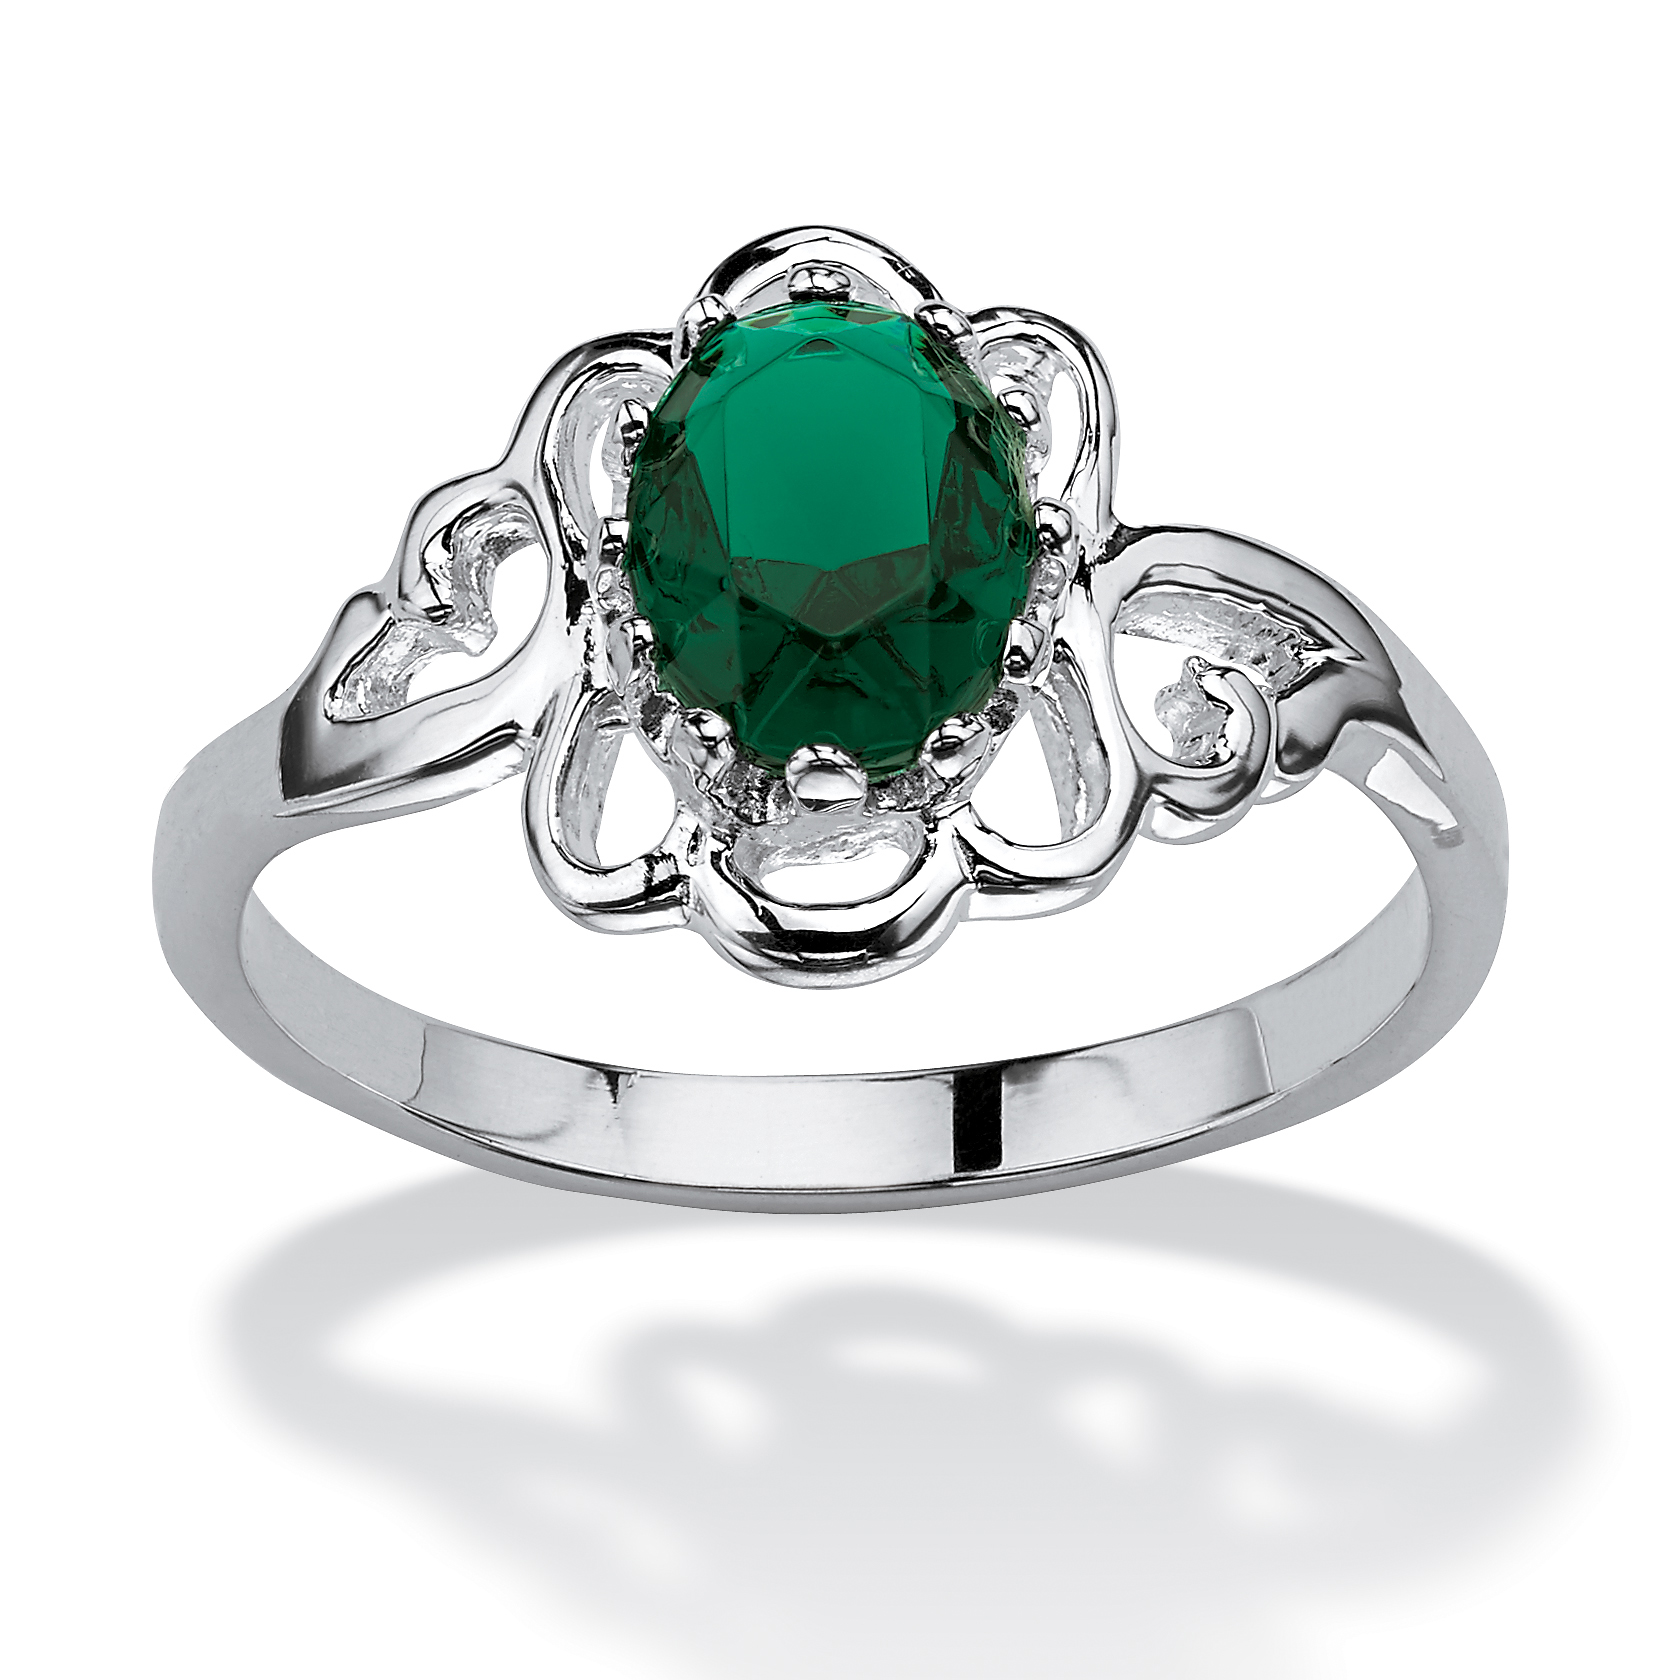 Oval-Cut Birthstone .925 Sterling Silver Ring-May-Simulated Emerald | eBay